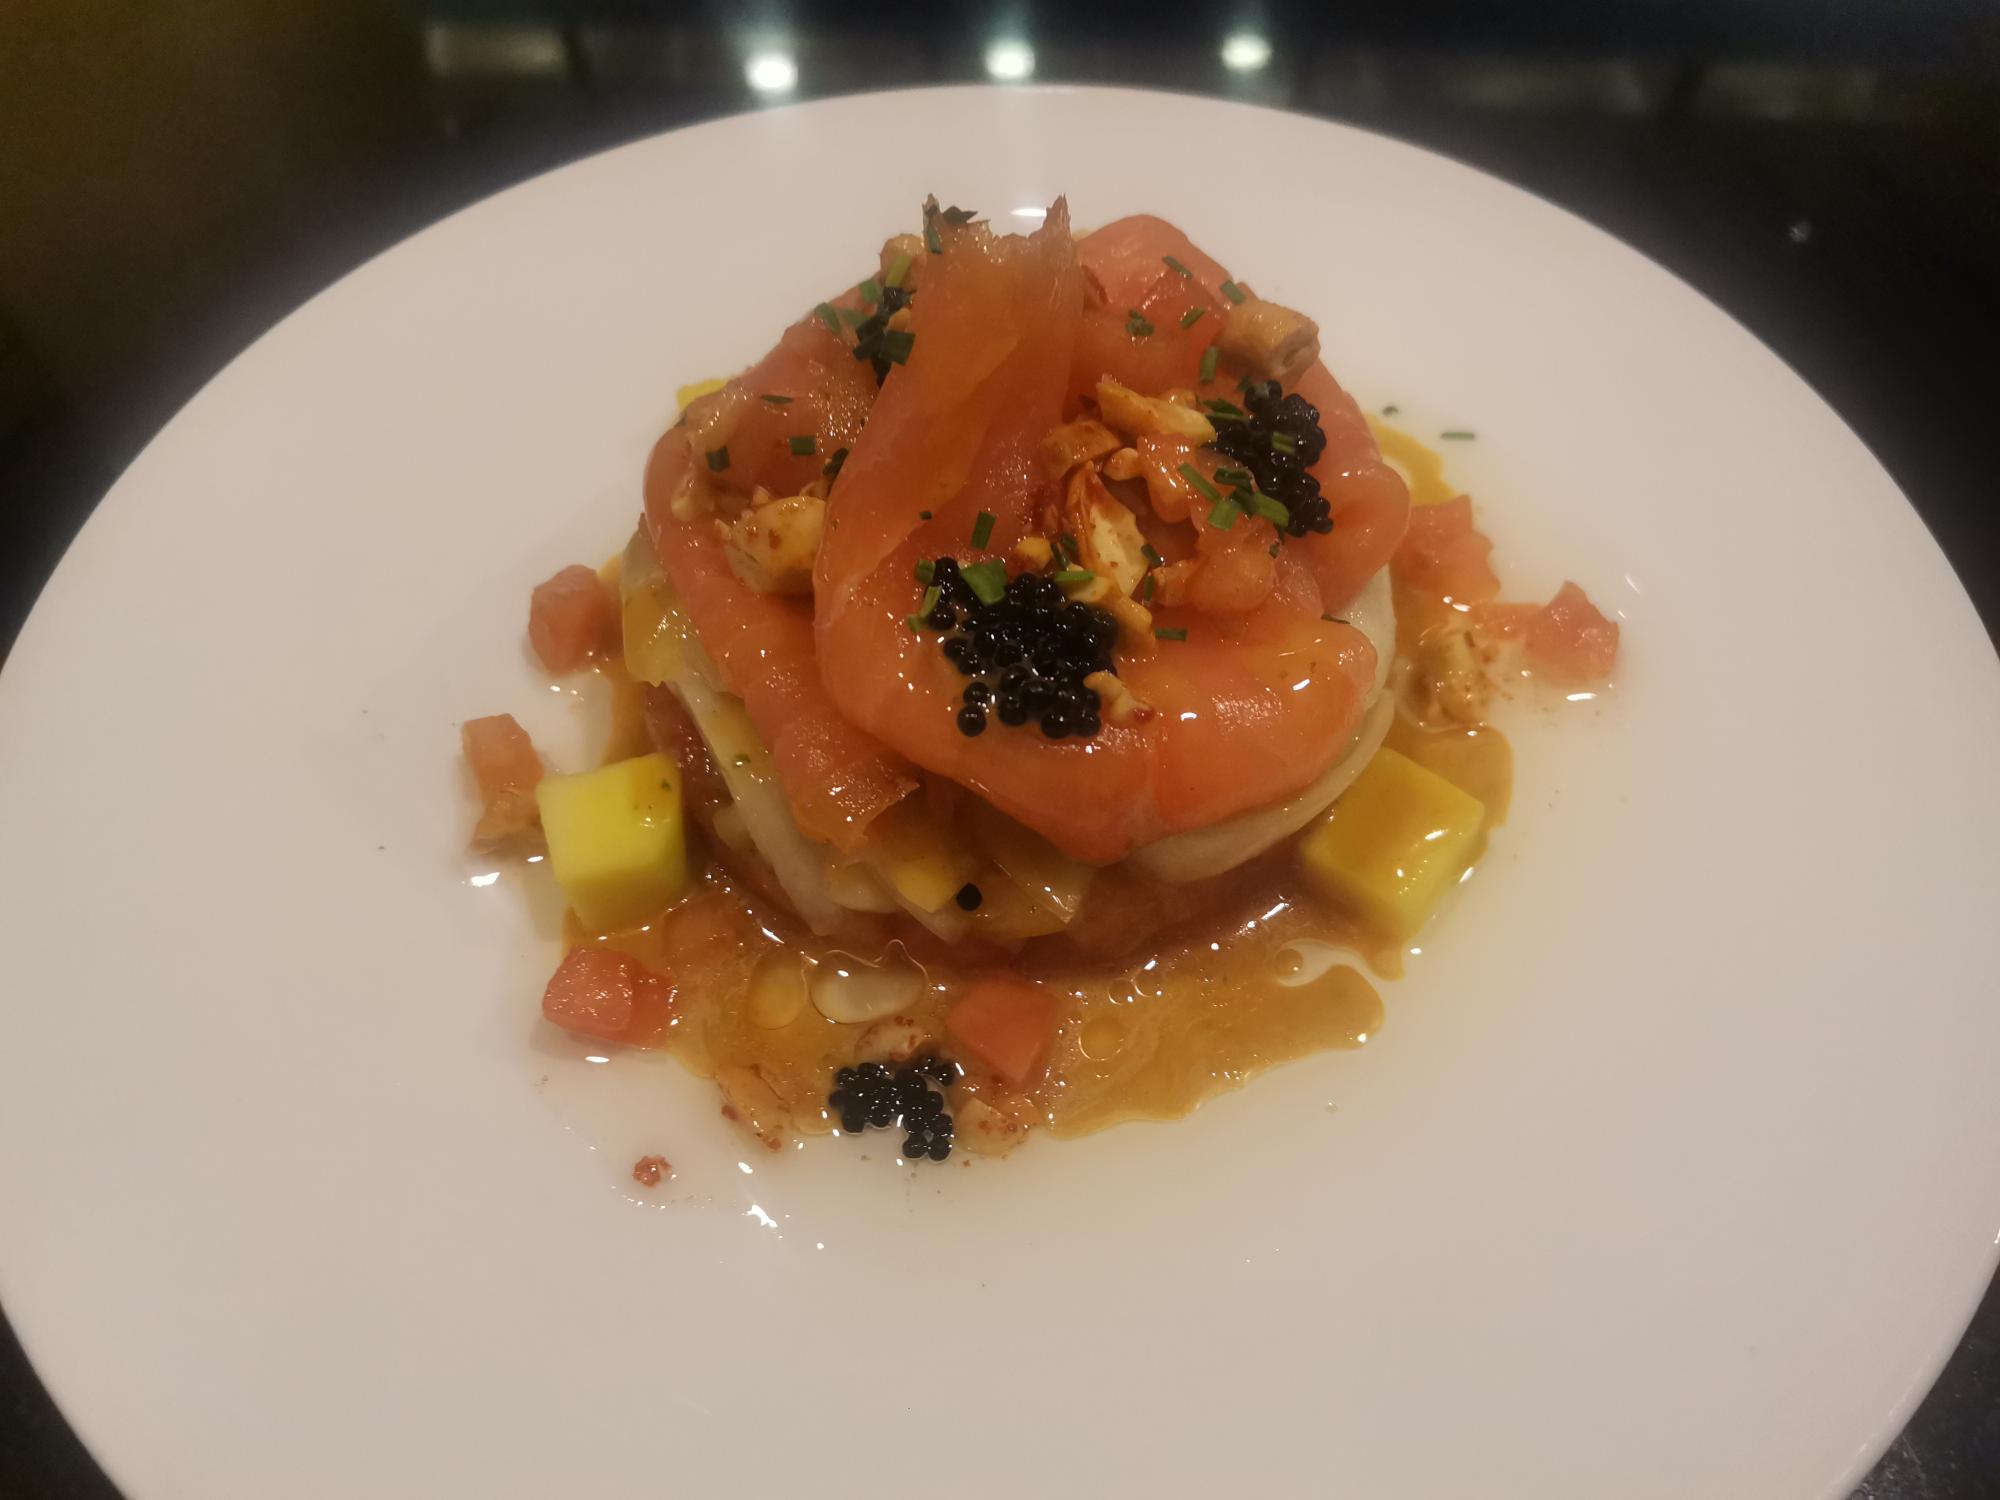 MARINATED SALMON AND PICKLED ENDIVES SALAD